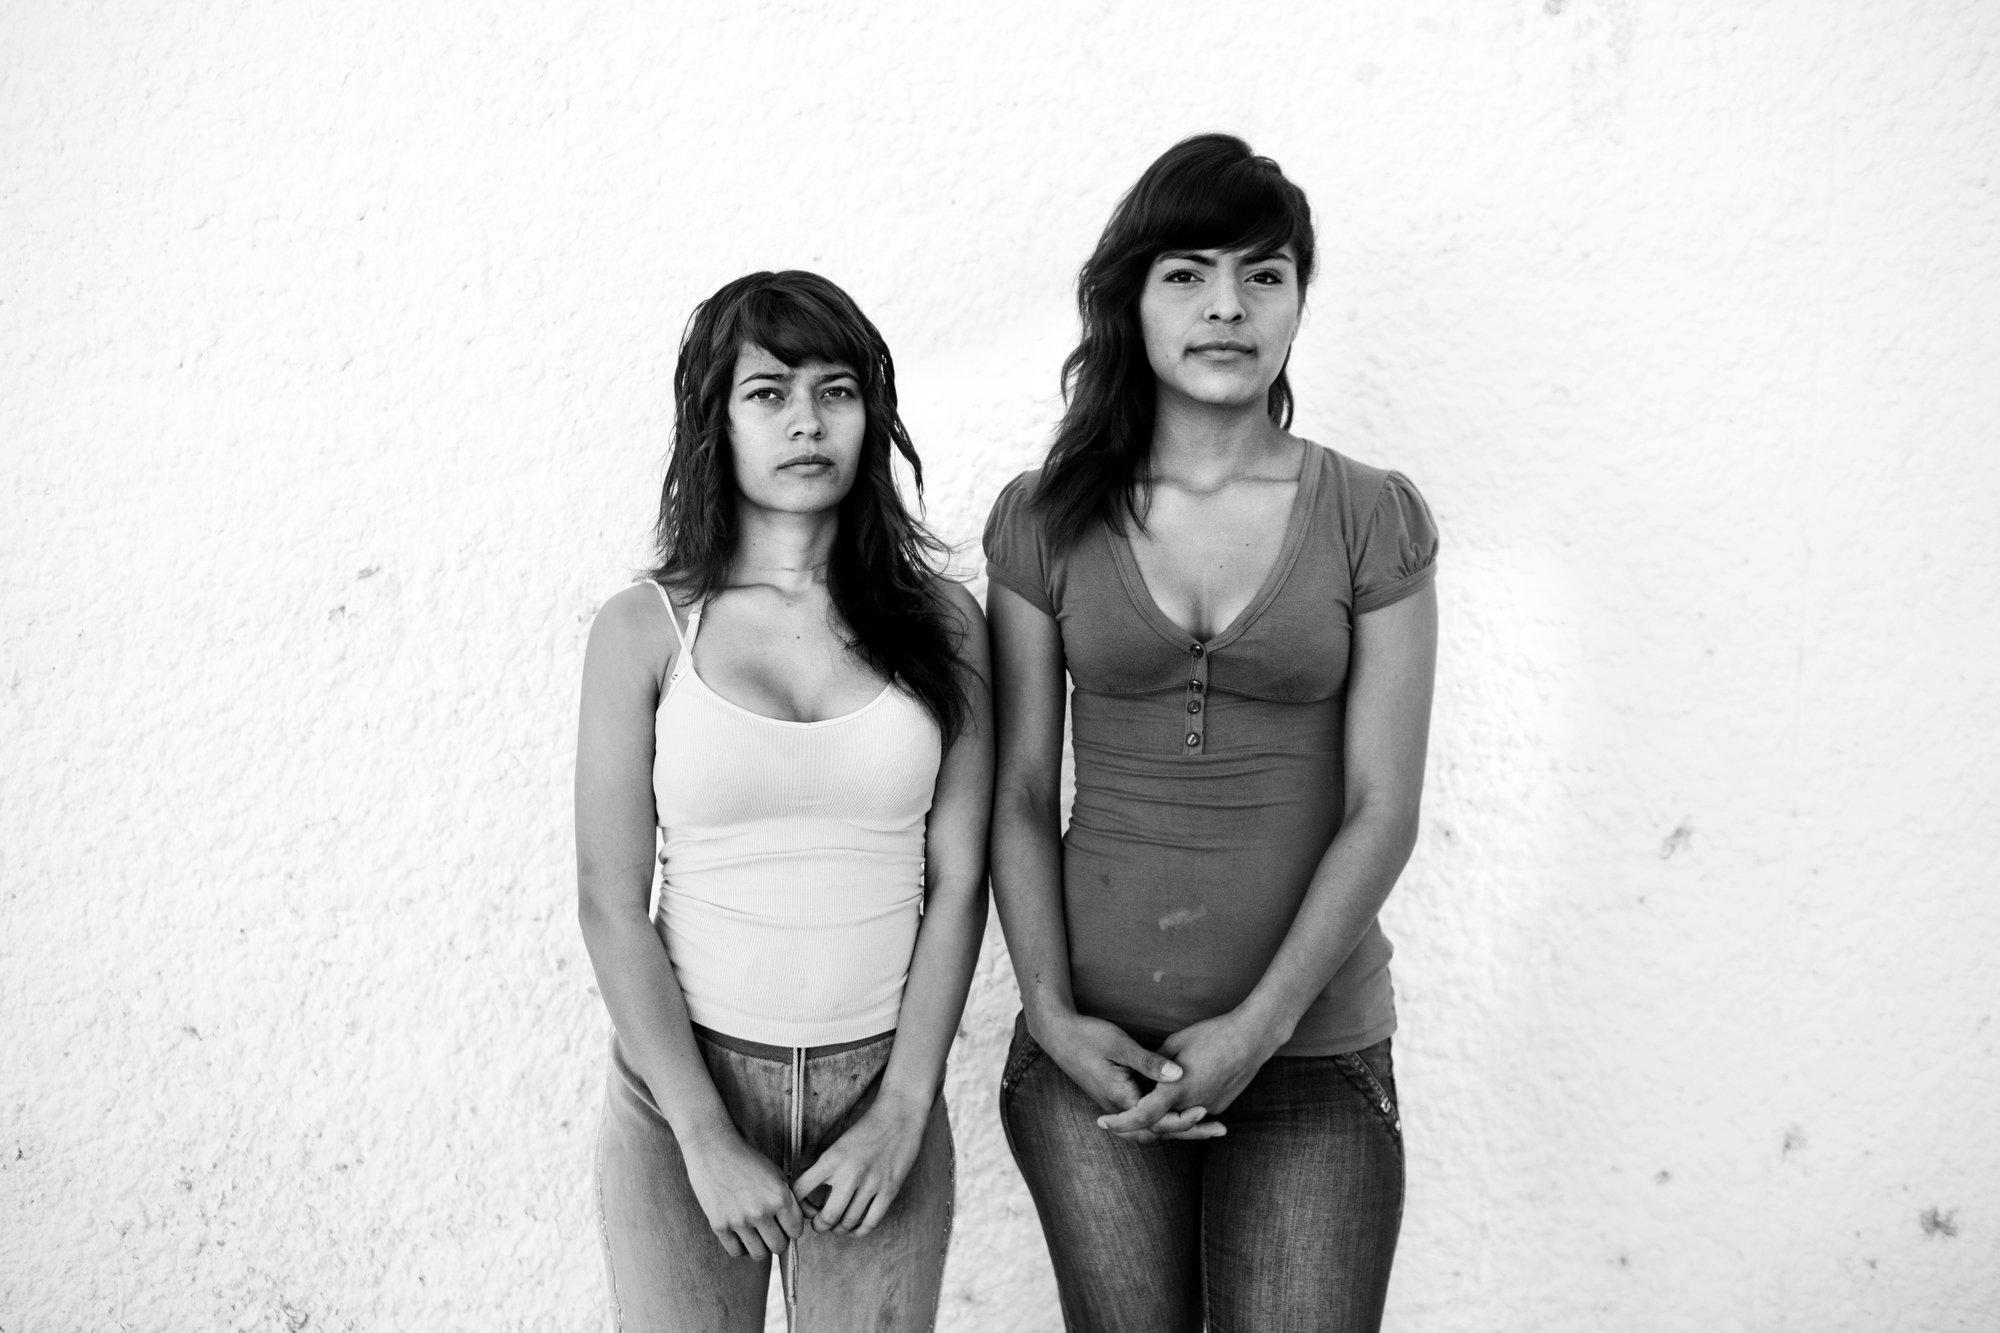  Claudia Ramirez Contreras, 21, and Eunice Ram�rez, 19, outside their prison cell in Ciudad Juarez, Mexico. The Ramirez sisters were models and party hostesses until they found themselves behind bars, accused of kidnapping. The young women would alle